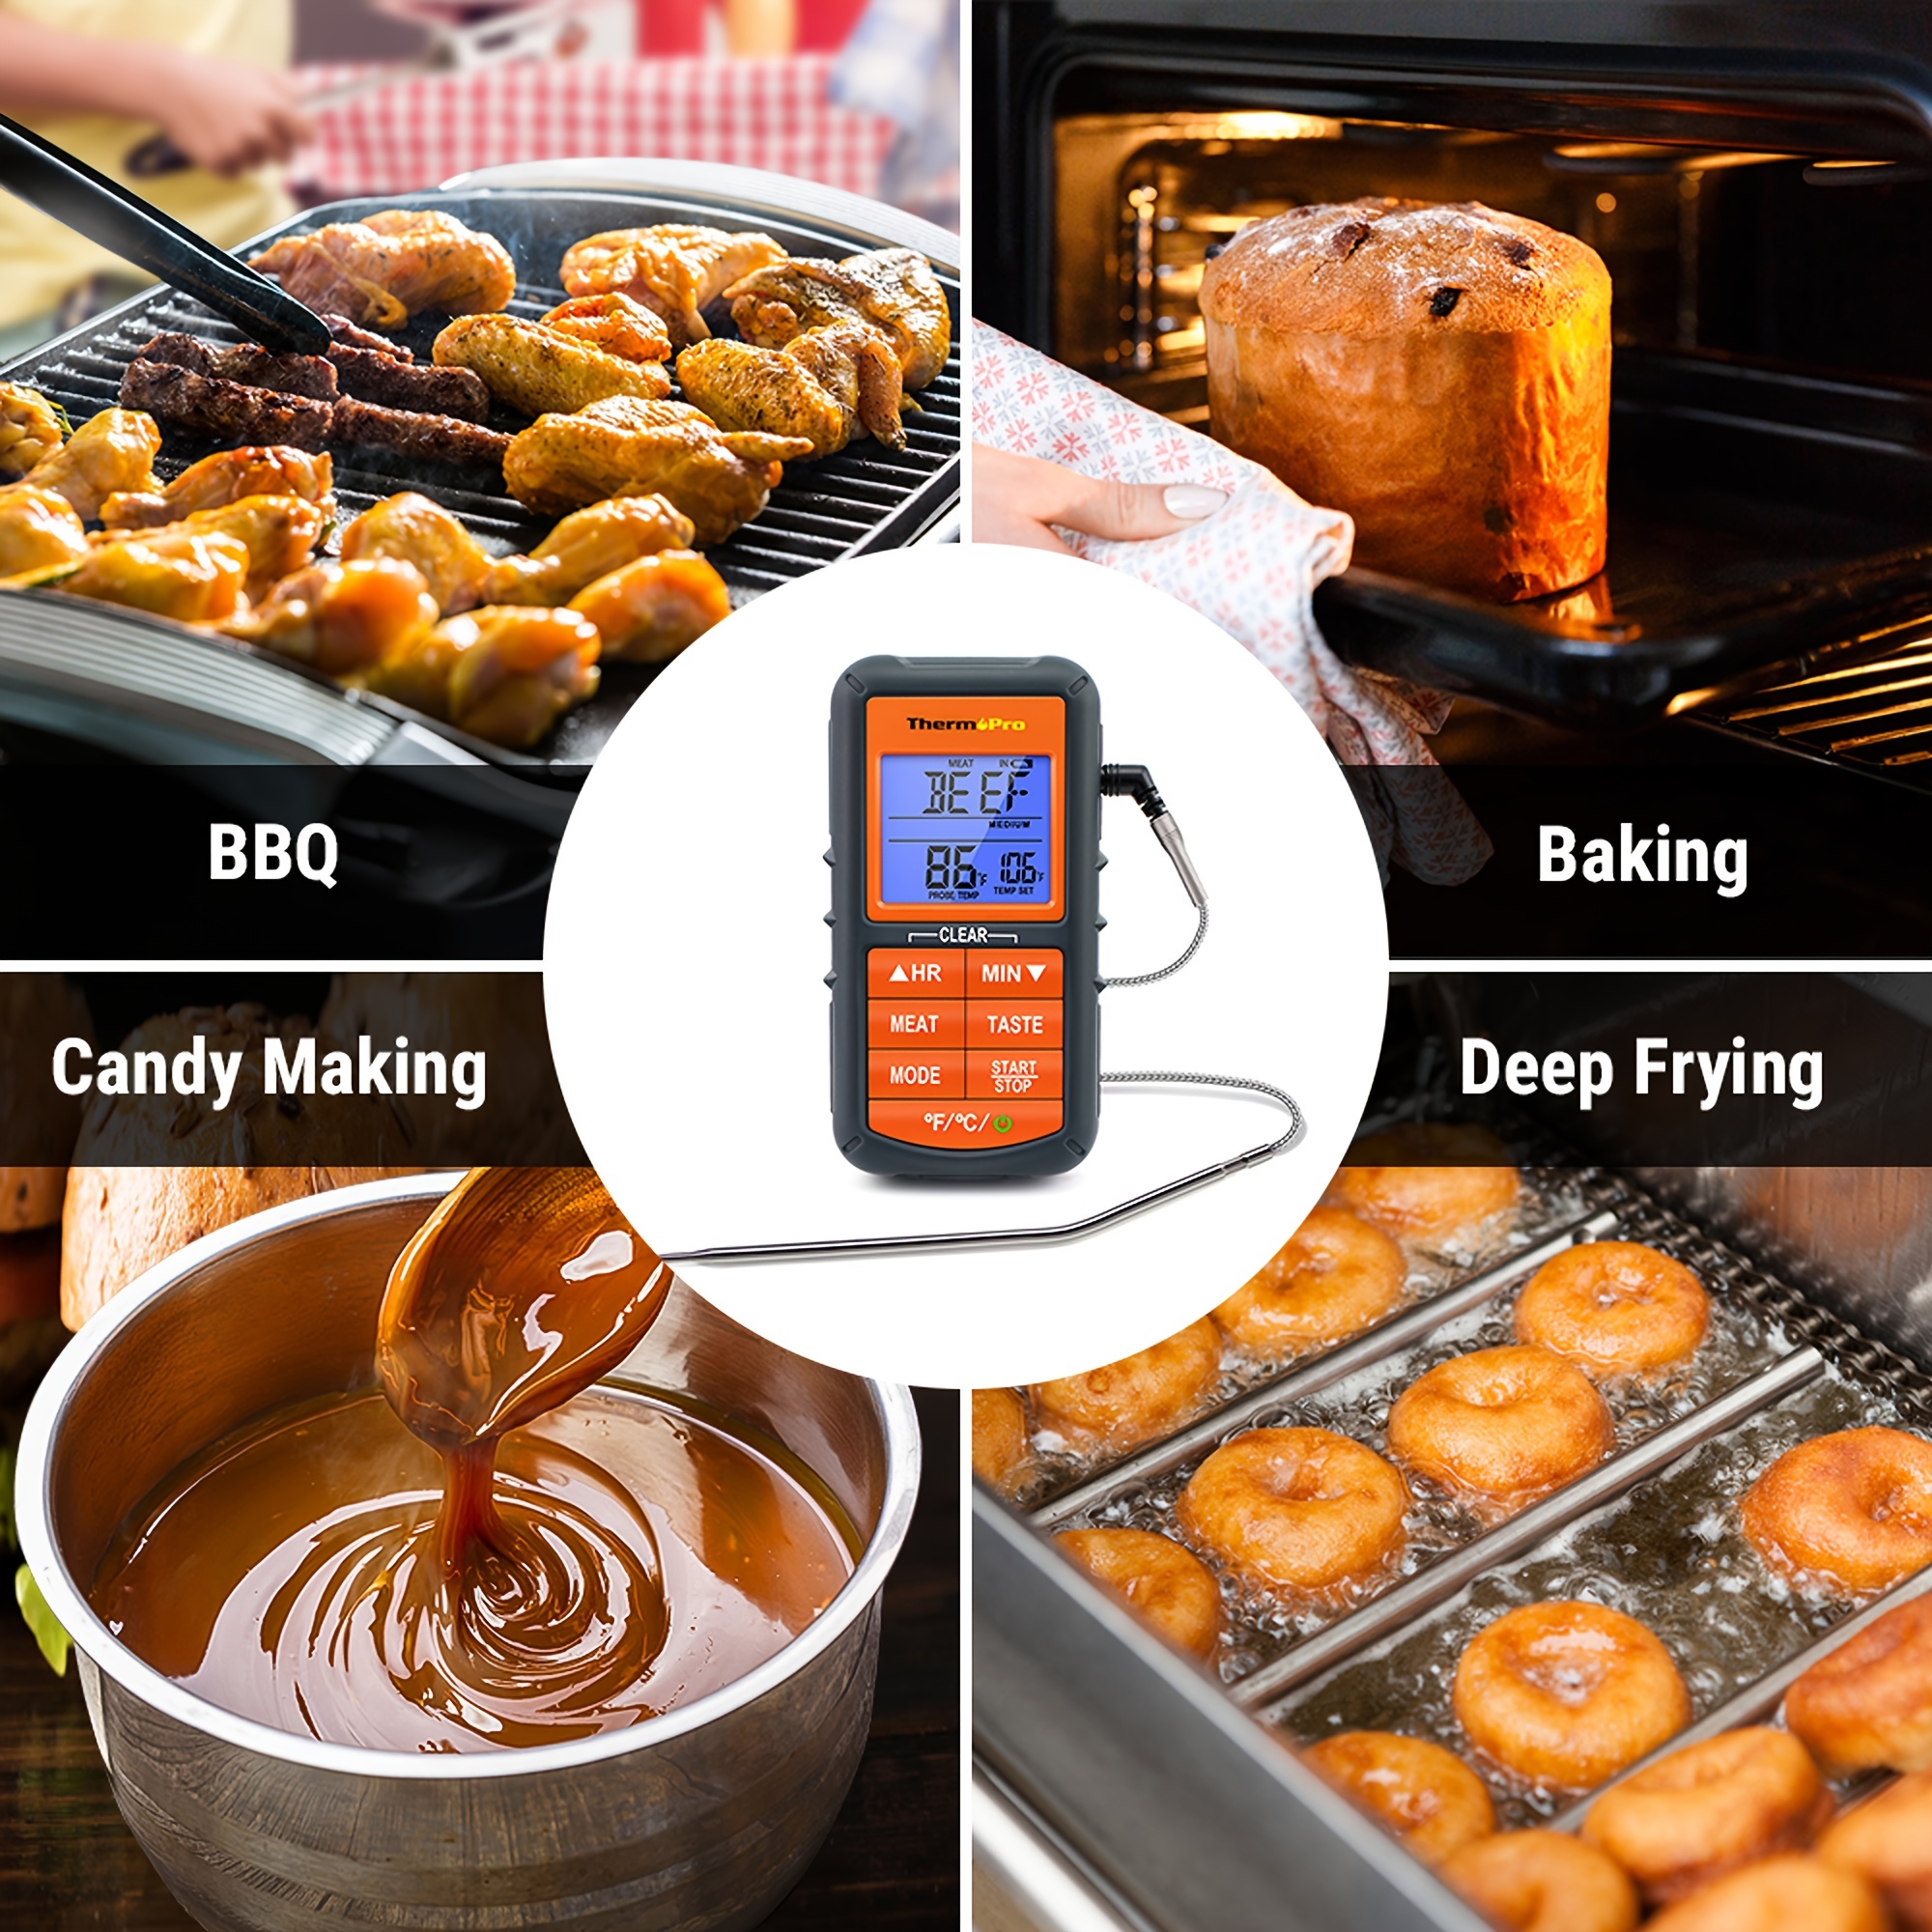 Thermopro Tp-22s Wireless Meat Thermometer - Dual Probe Digital